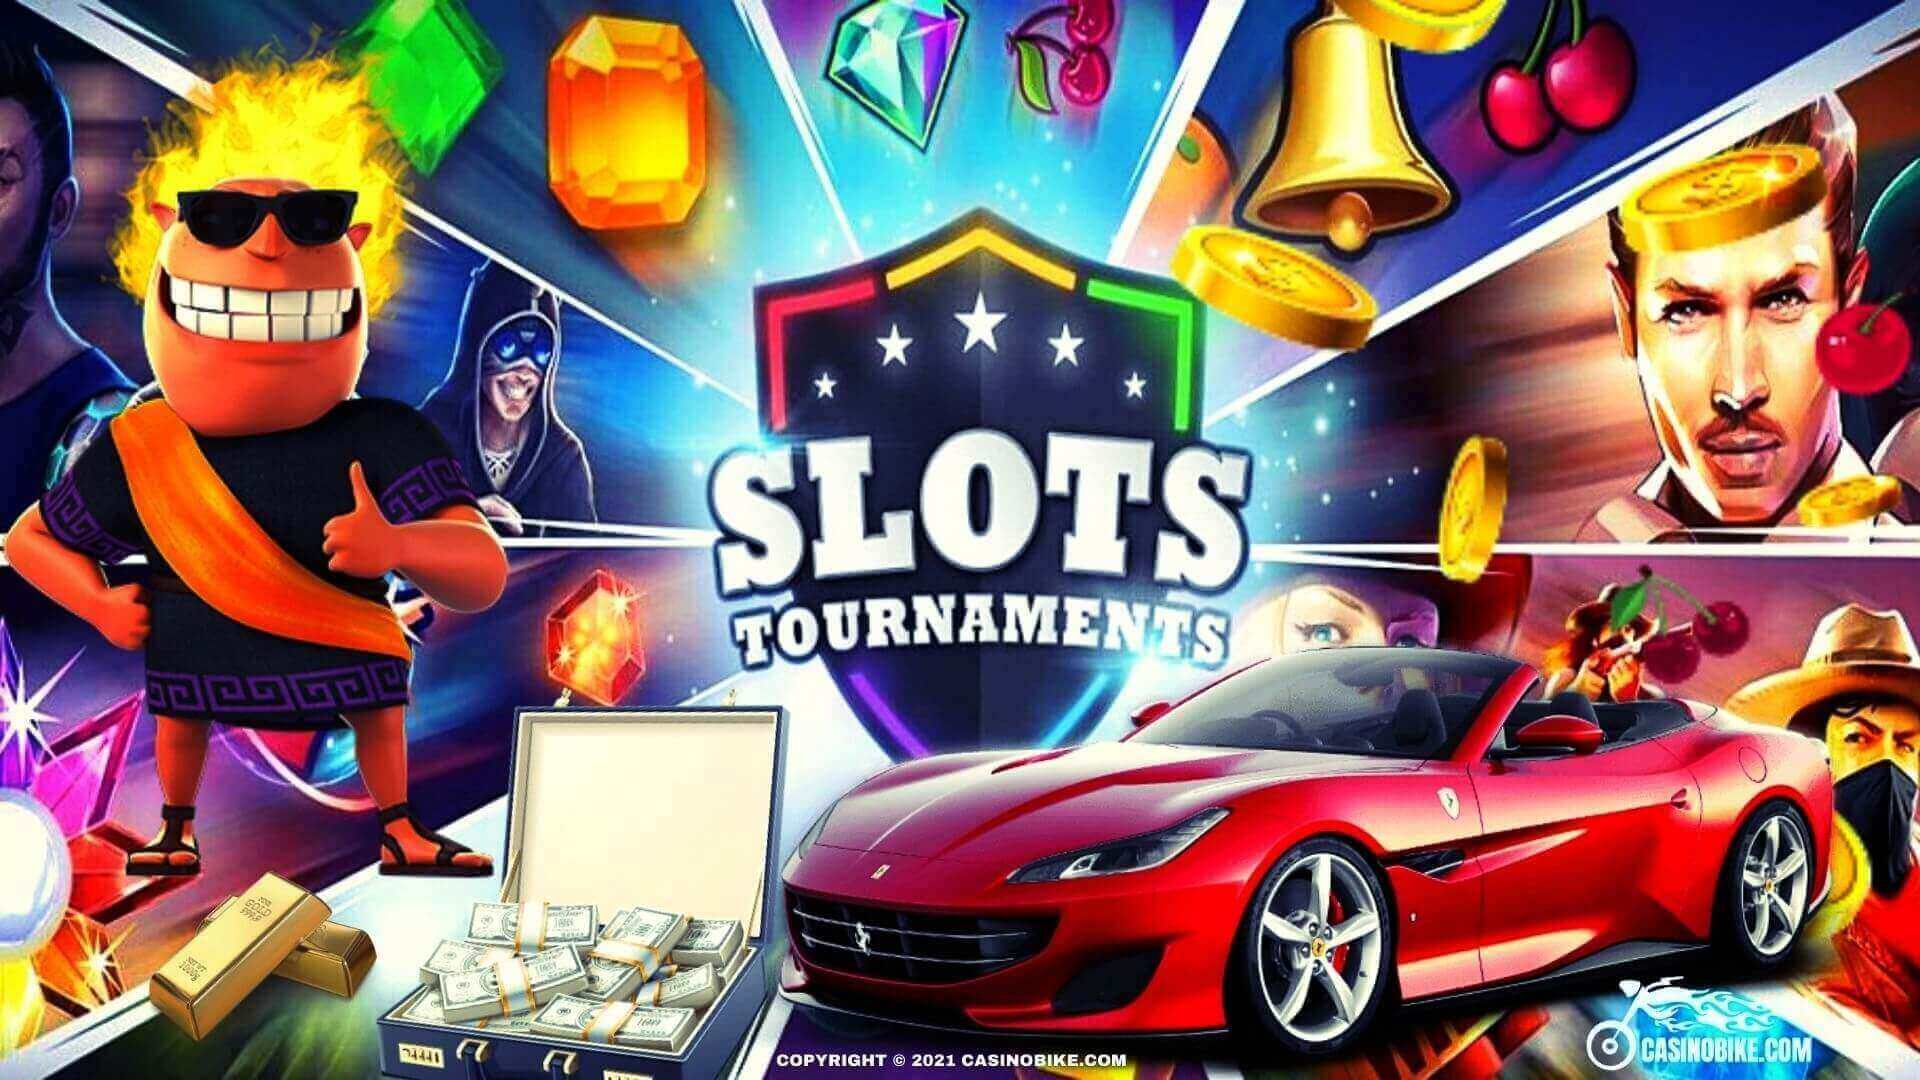 Find the best online slot tournaments